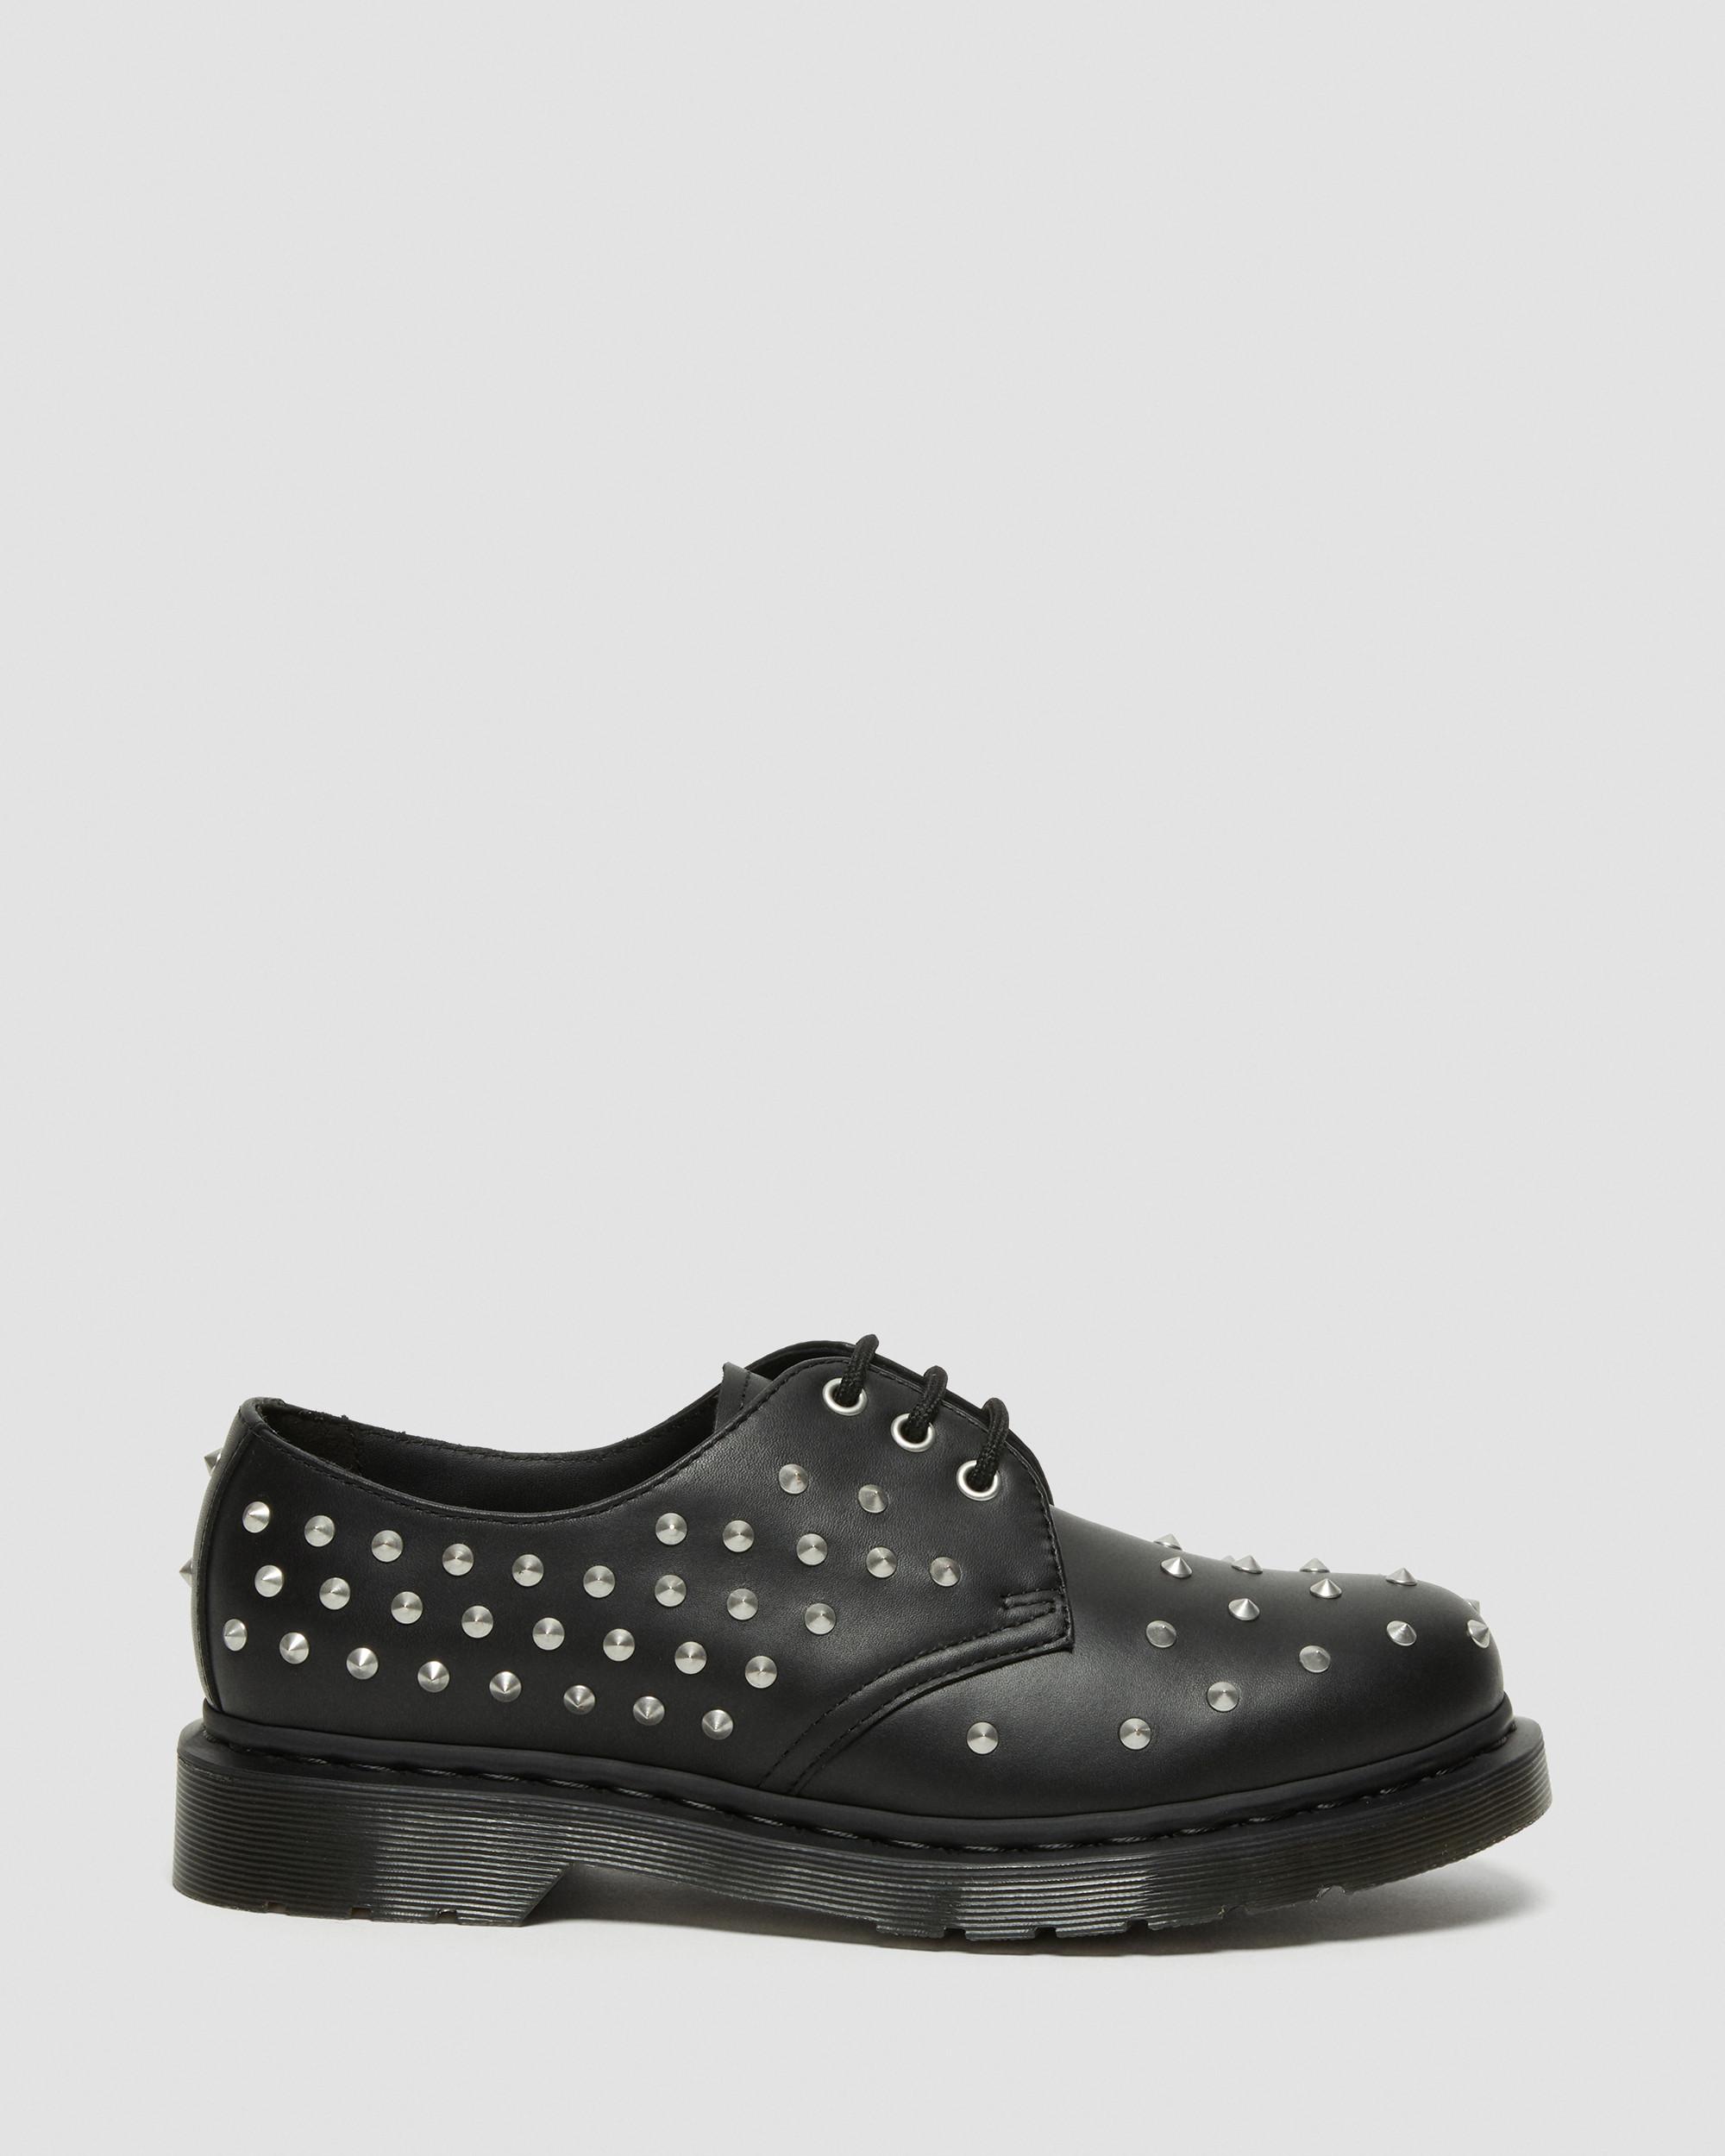 DR MARTENS 1461 Stud Wanama Leather Oxford Shoes